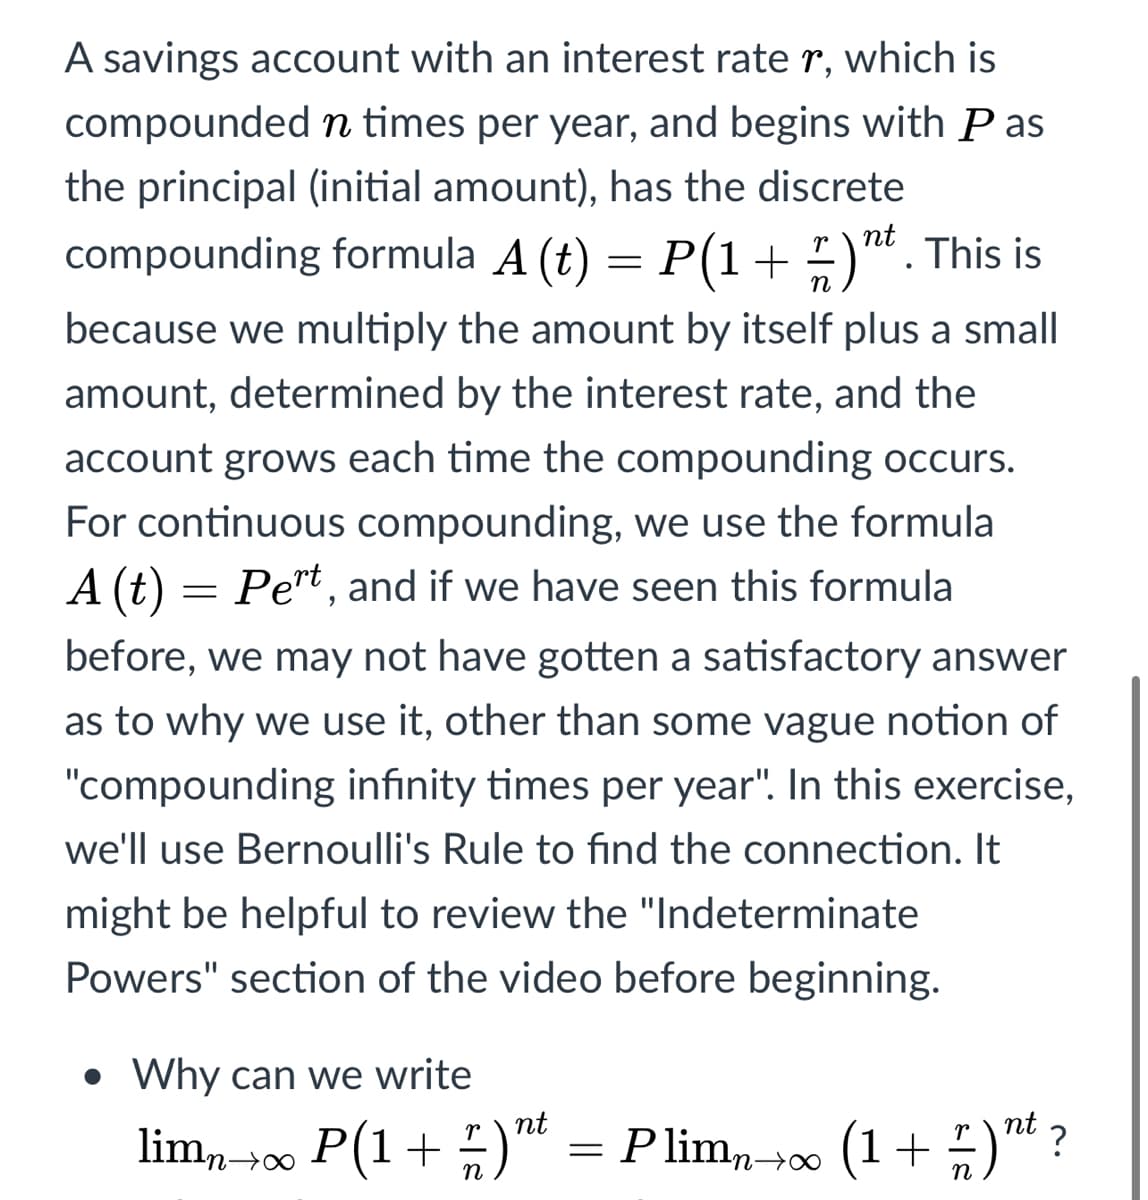 A savings account with an interest rate r, which is
compounded n times per year, and begins with P as
the principal (initial amount), has the discrete
nt
compounding formula A (t) = P(1+)". This is
n
because we multiply the amount by itself plus a small
amount, determined by the interest rate, and the
account grows each time the compounding occurs.
For continuous compounding, we use the formula
A (t) = Pert , and if we have seen this formula
before, we may not have gotten a satisfactory answer
as to why we use it, other than some vague notion of
"compounding infinity times per year". In this exercise,
we'll use Bernoulli's Rule to find the connection. It
might be helpful to review the "Indeterminate
Powers" section of the video before beginning.
Why can we write
nt
lim,→00 P(1+ )"t
P limn¬∞ (1+)™ ?
n
